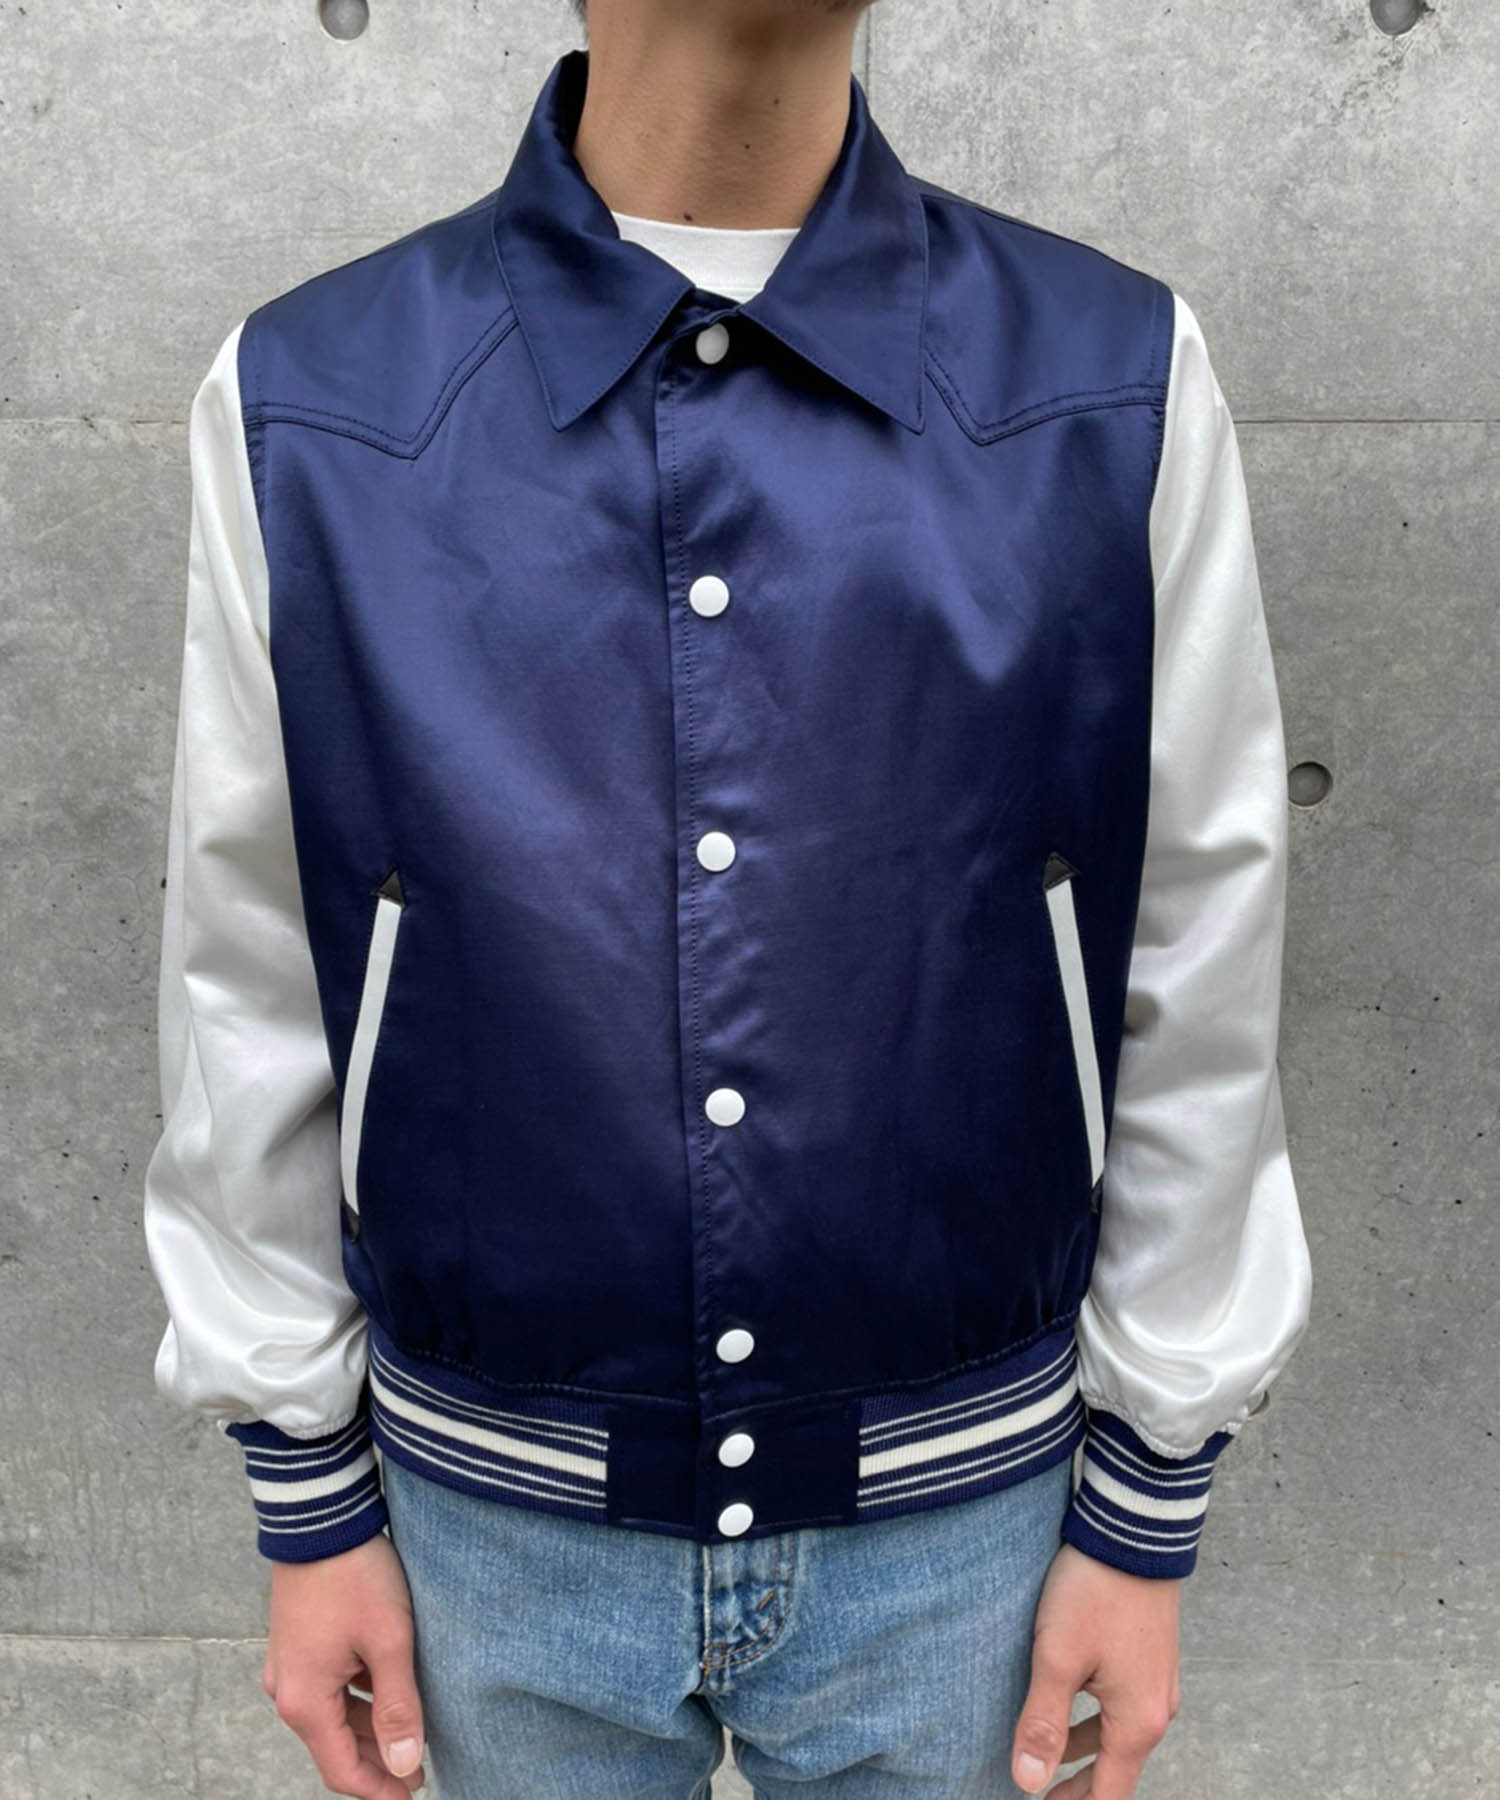 WESTERN SPORTS JACKET The Letters